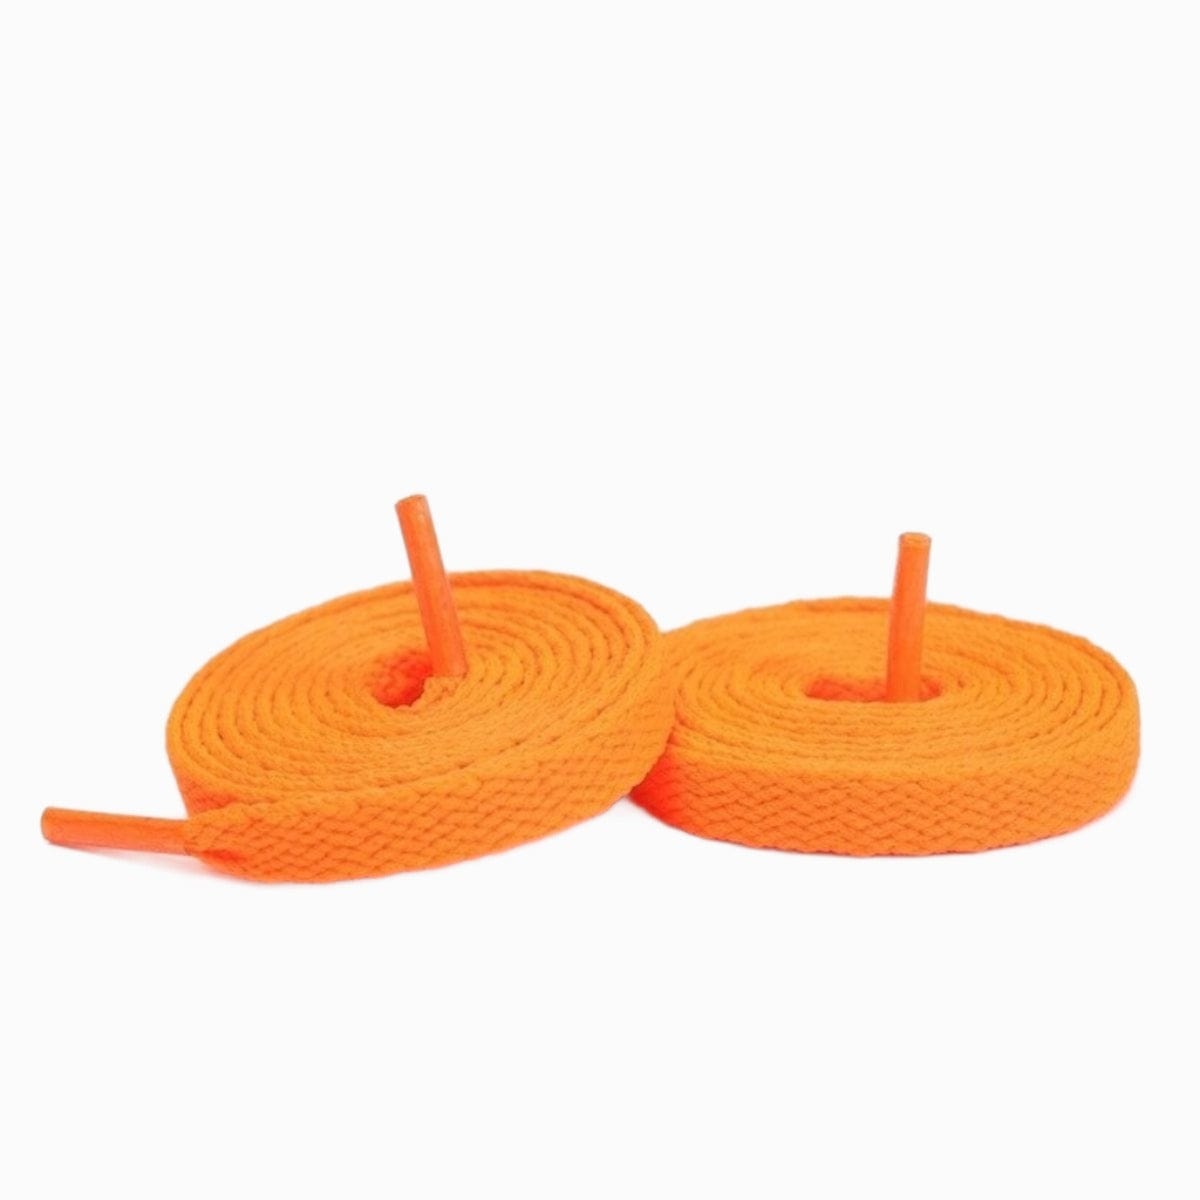 Orange Replacement Shoe Laces for Adidas Handball Spezial Sneakers by Kicks Shoelaces